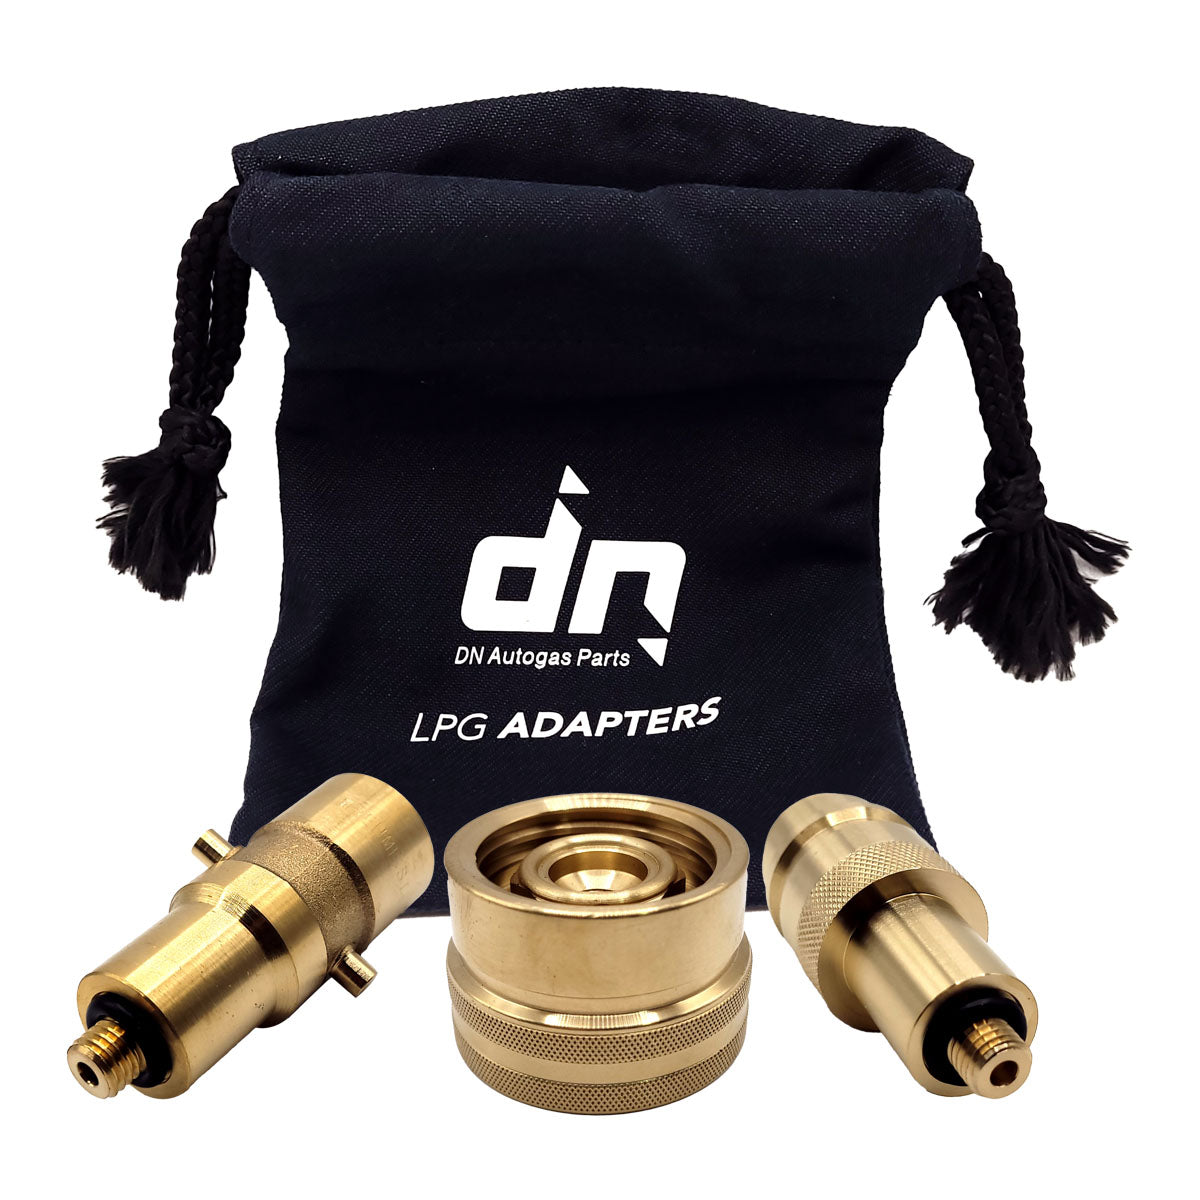 LPG GPL Autogas Tank Refill Adapter Set M10 For Europe ACME To EURONOZZLE, Bayonet Or DISH With A Bag